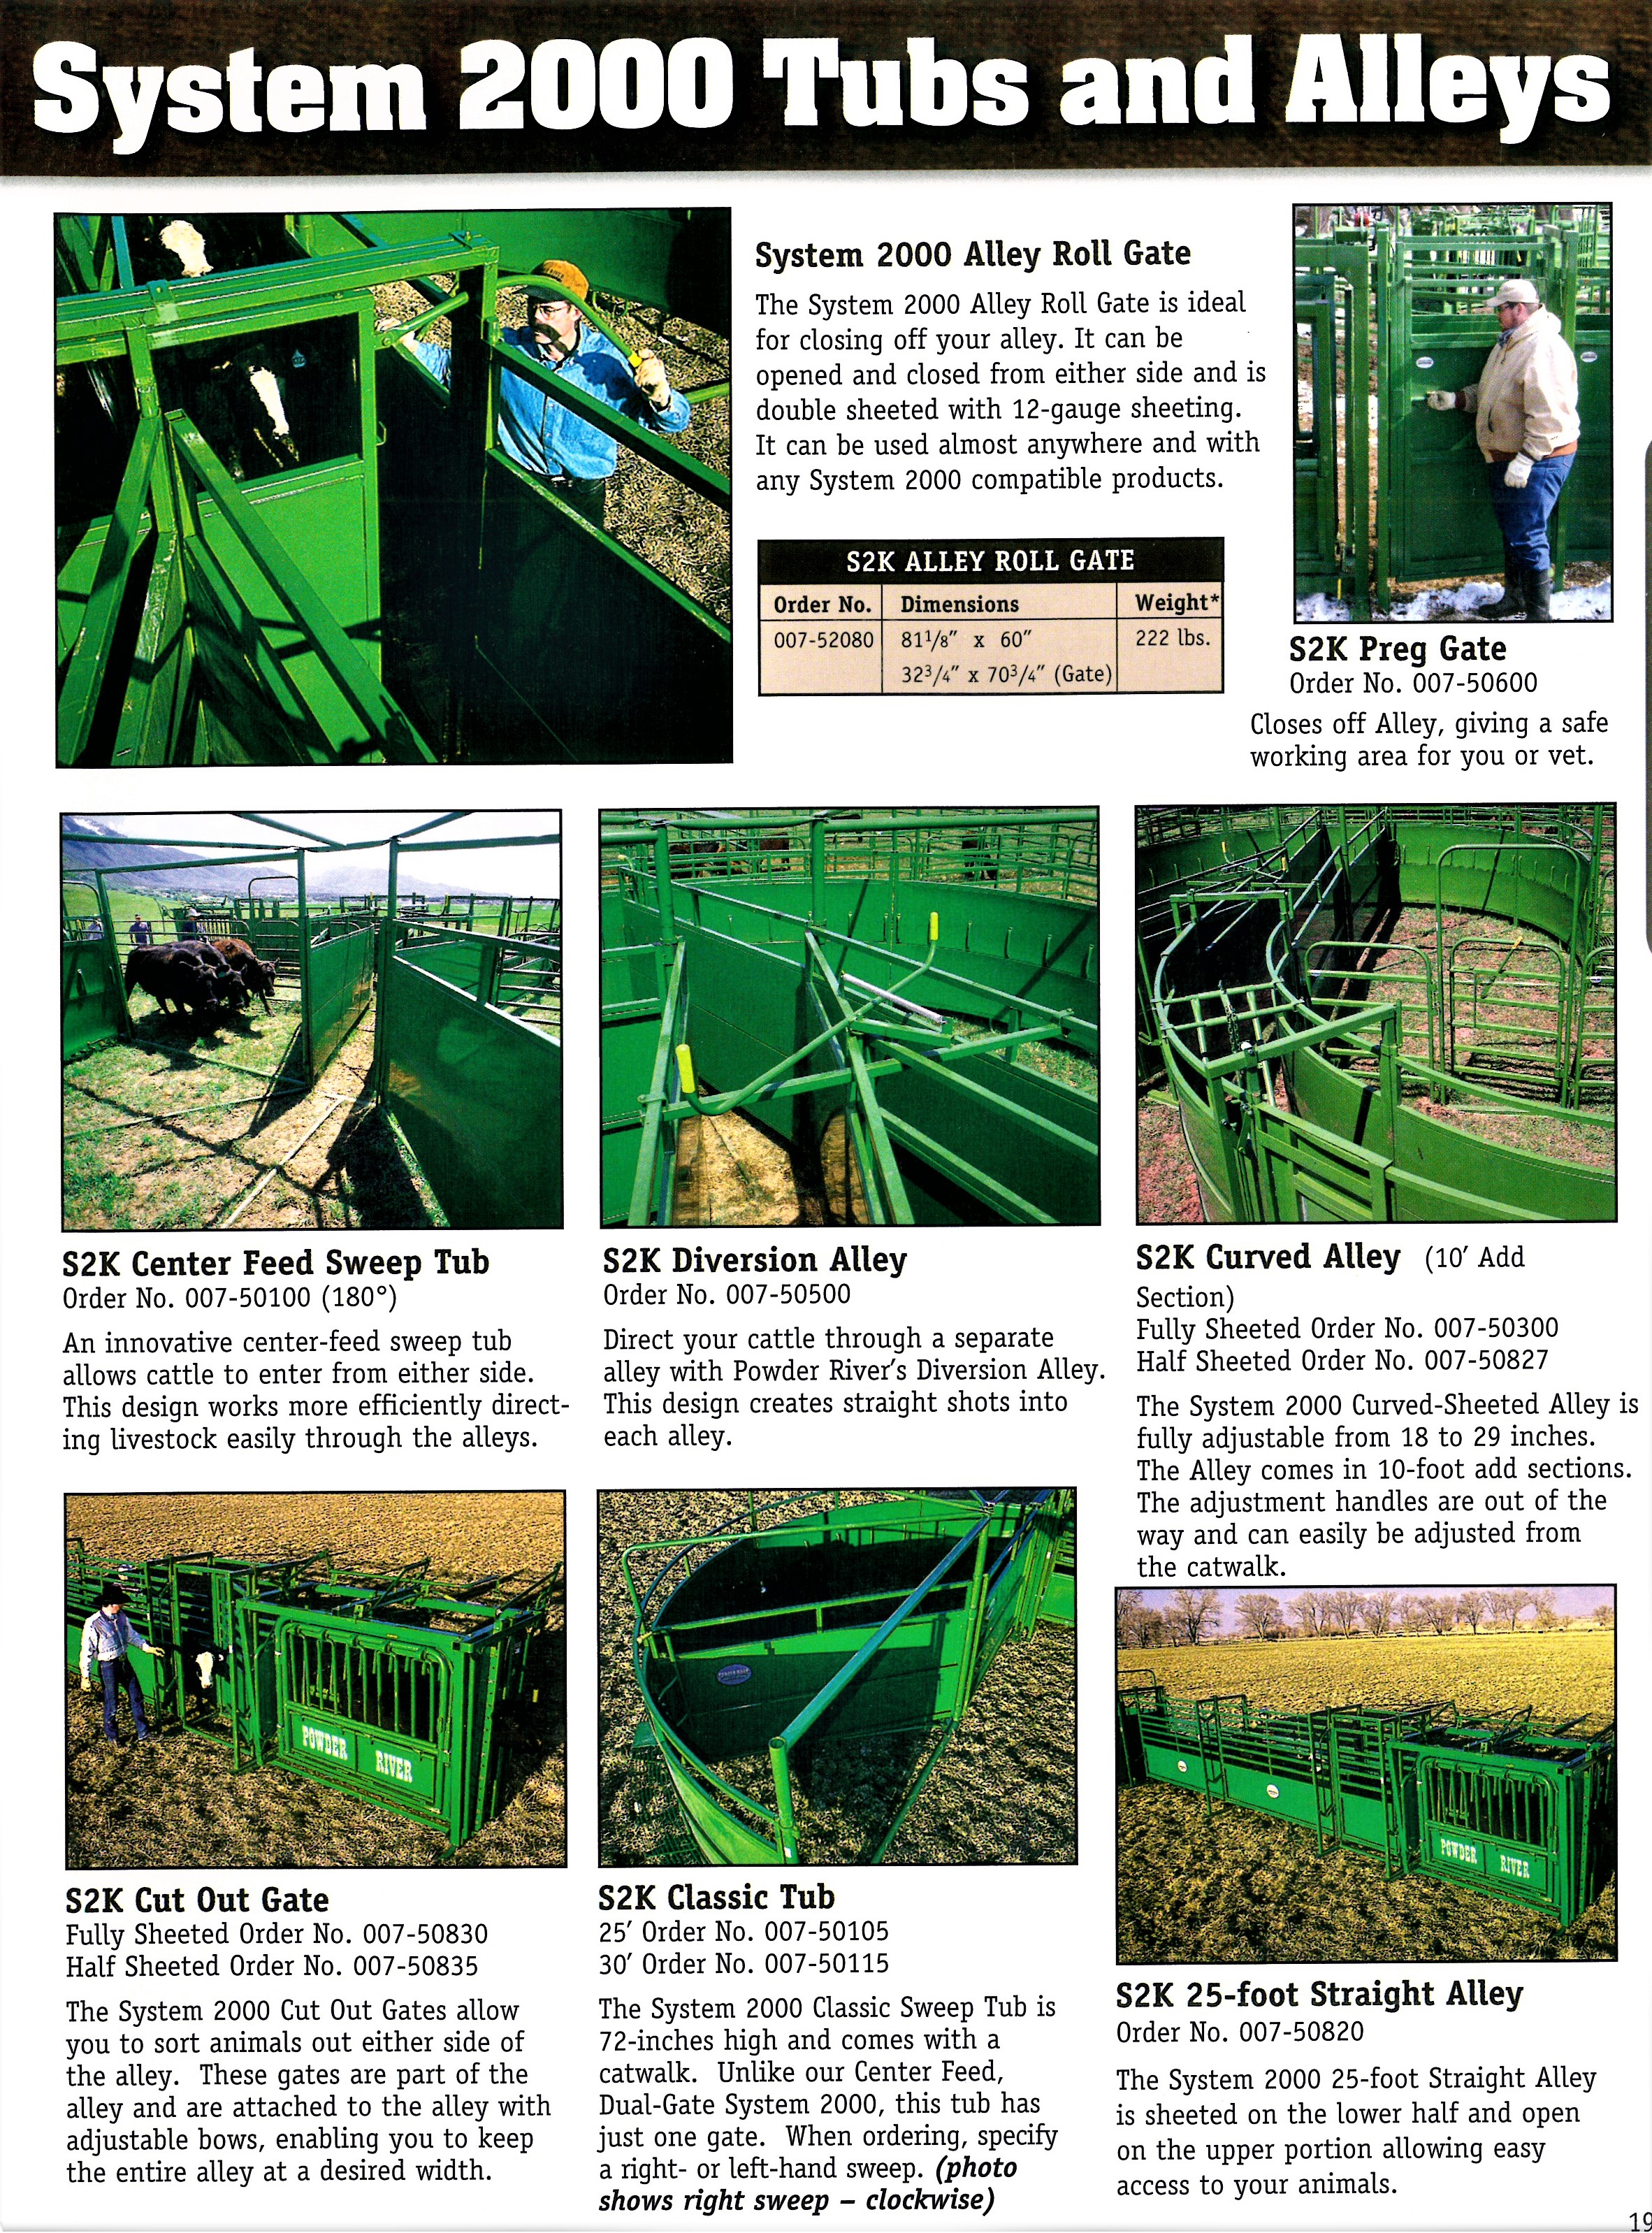 august-system-2000-tubs-and-alleys-preg-gate-roll-gate...-pg-19.jpg